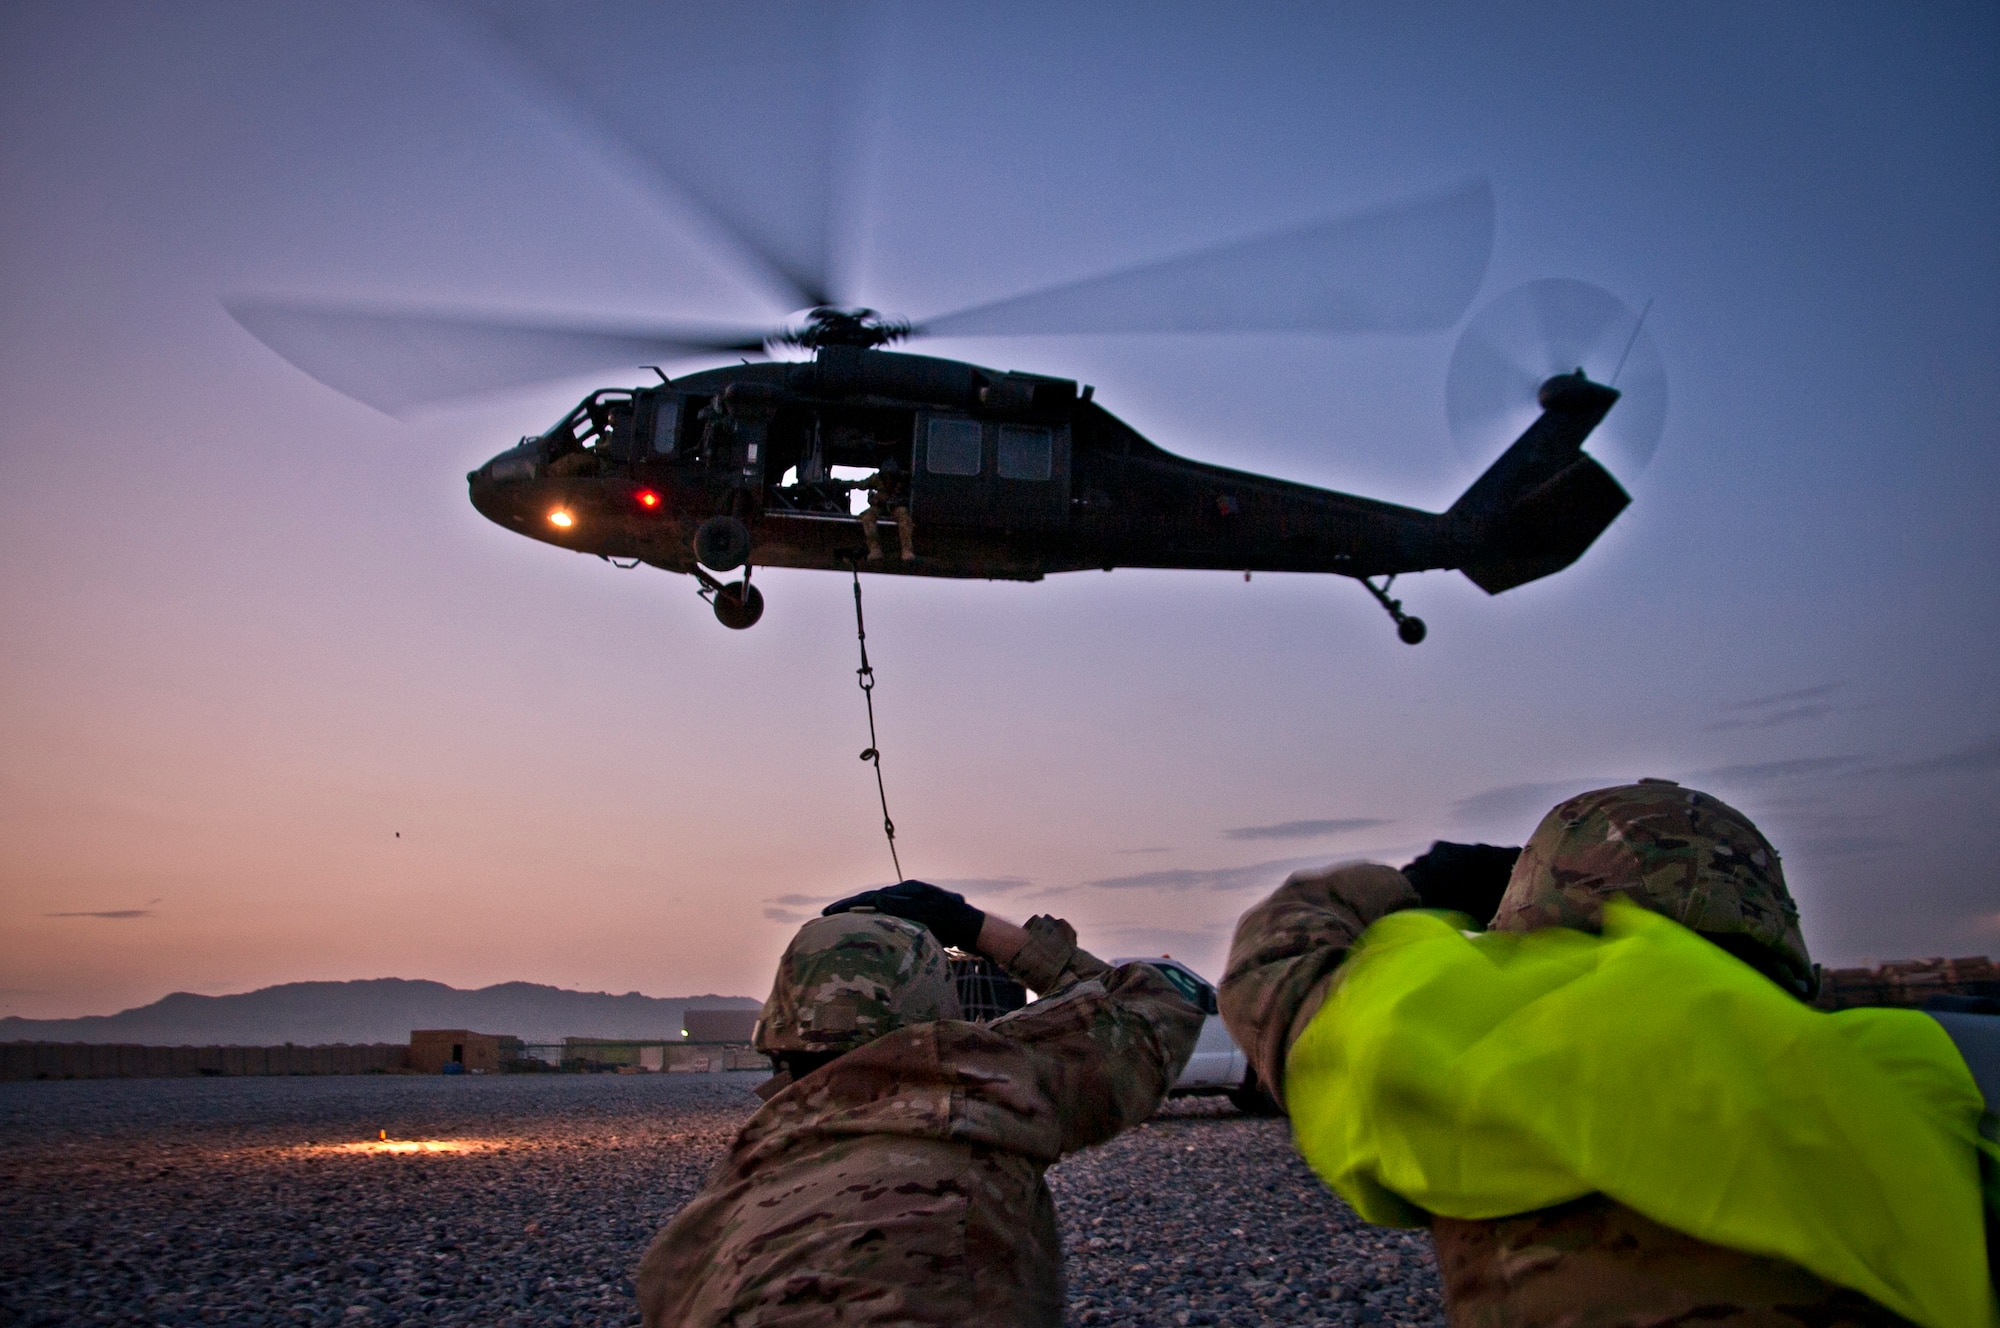 U.S. Air Force Tech. Sgt. Sean Buck and Airman 1st Class Pedro Cahua, both with the 451st Expeditionary Aircraft Maintenance Squadron, signal “all-clear” to the crew of a UH-60 Black Hawk helicopter after sling-loading a 1,800 pound A-22 cargo bag during a joint-coalition training mission at Kandahar Airfield, Afghanistan, June 1, 2013. The aircrew consisted of Soldiers from the 3rd Combat Aviation Brigade here. The training provided coalition members the opportunity to learn the concepts of illuminating a landing zone as well as in-flight cargo sling loading. (U.S. Air Force photo/Senior Airman Scott Saldukas)